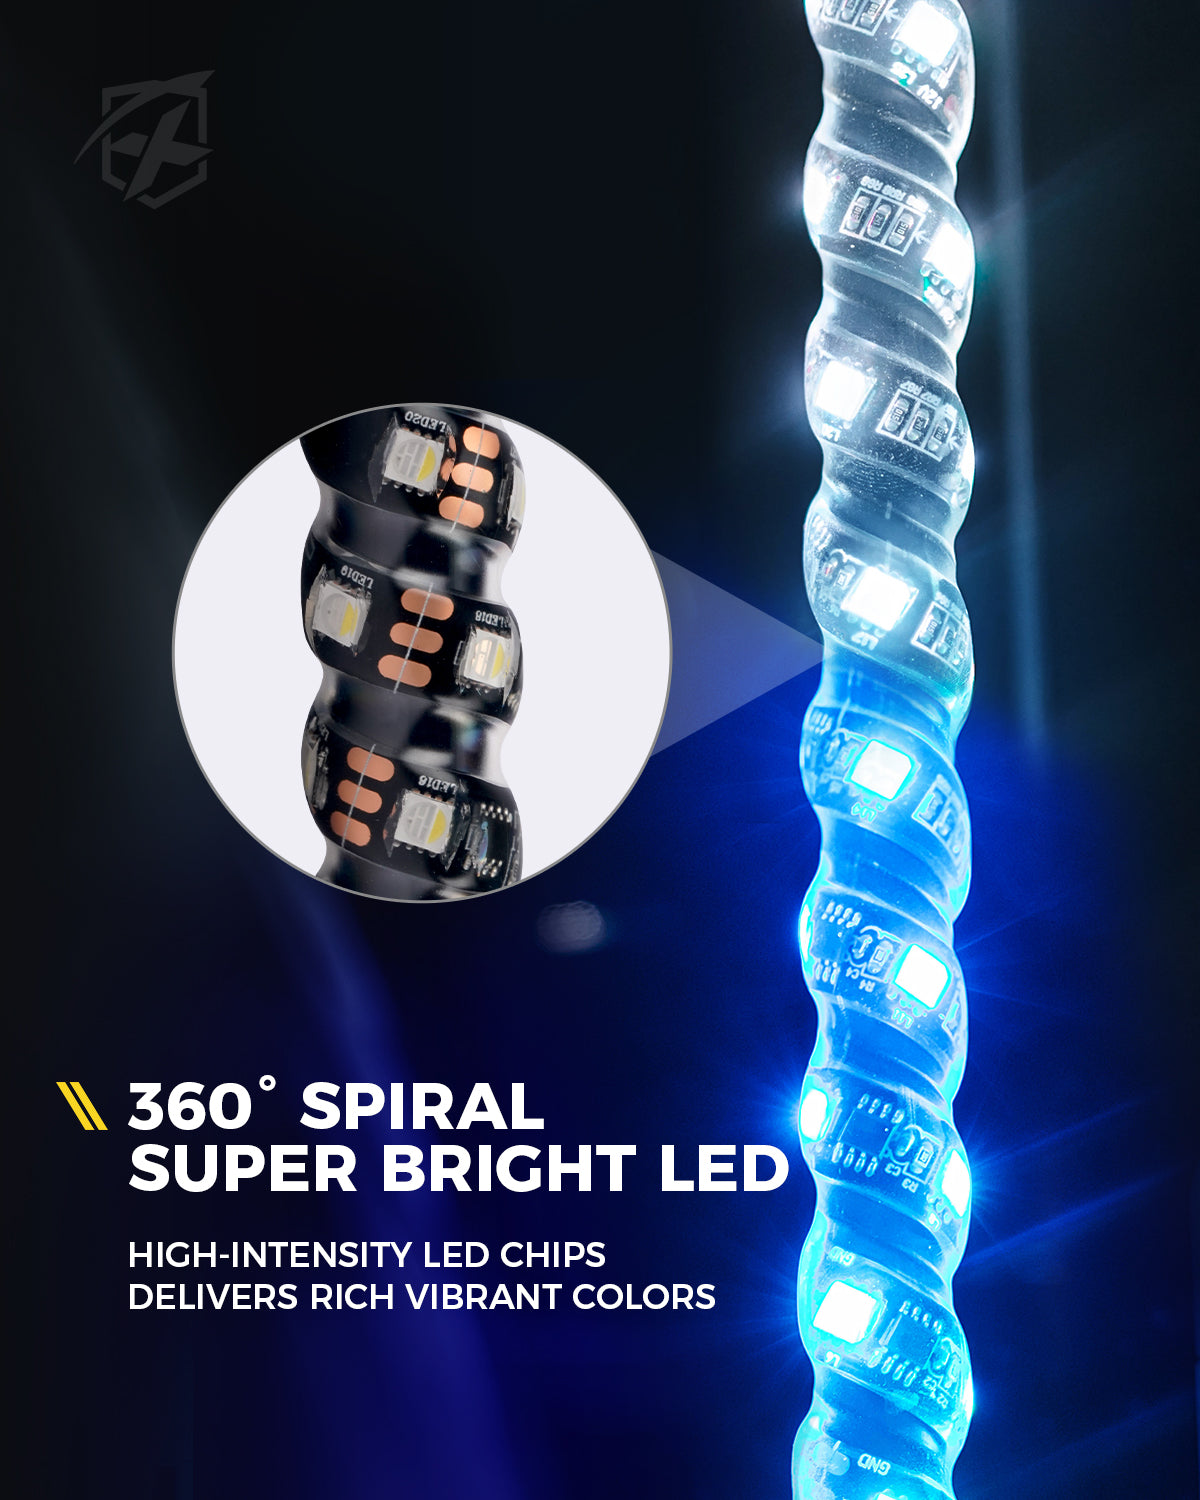 The Spiral Solid Color LED Whip Light with Spring Mount